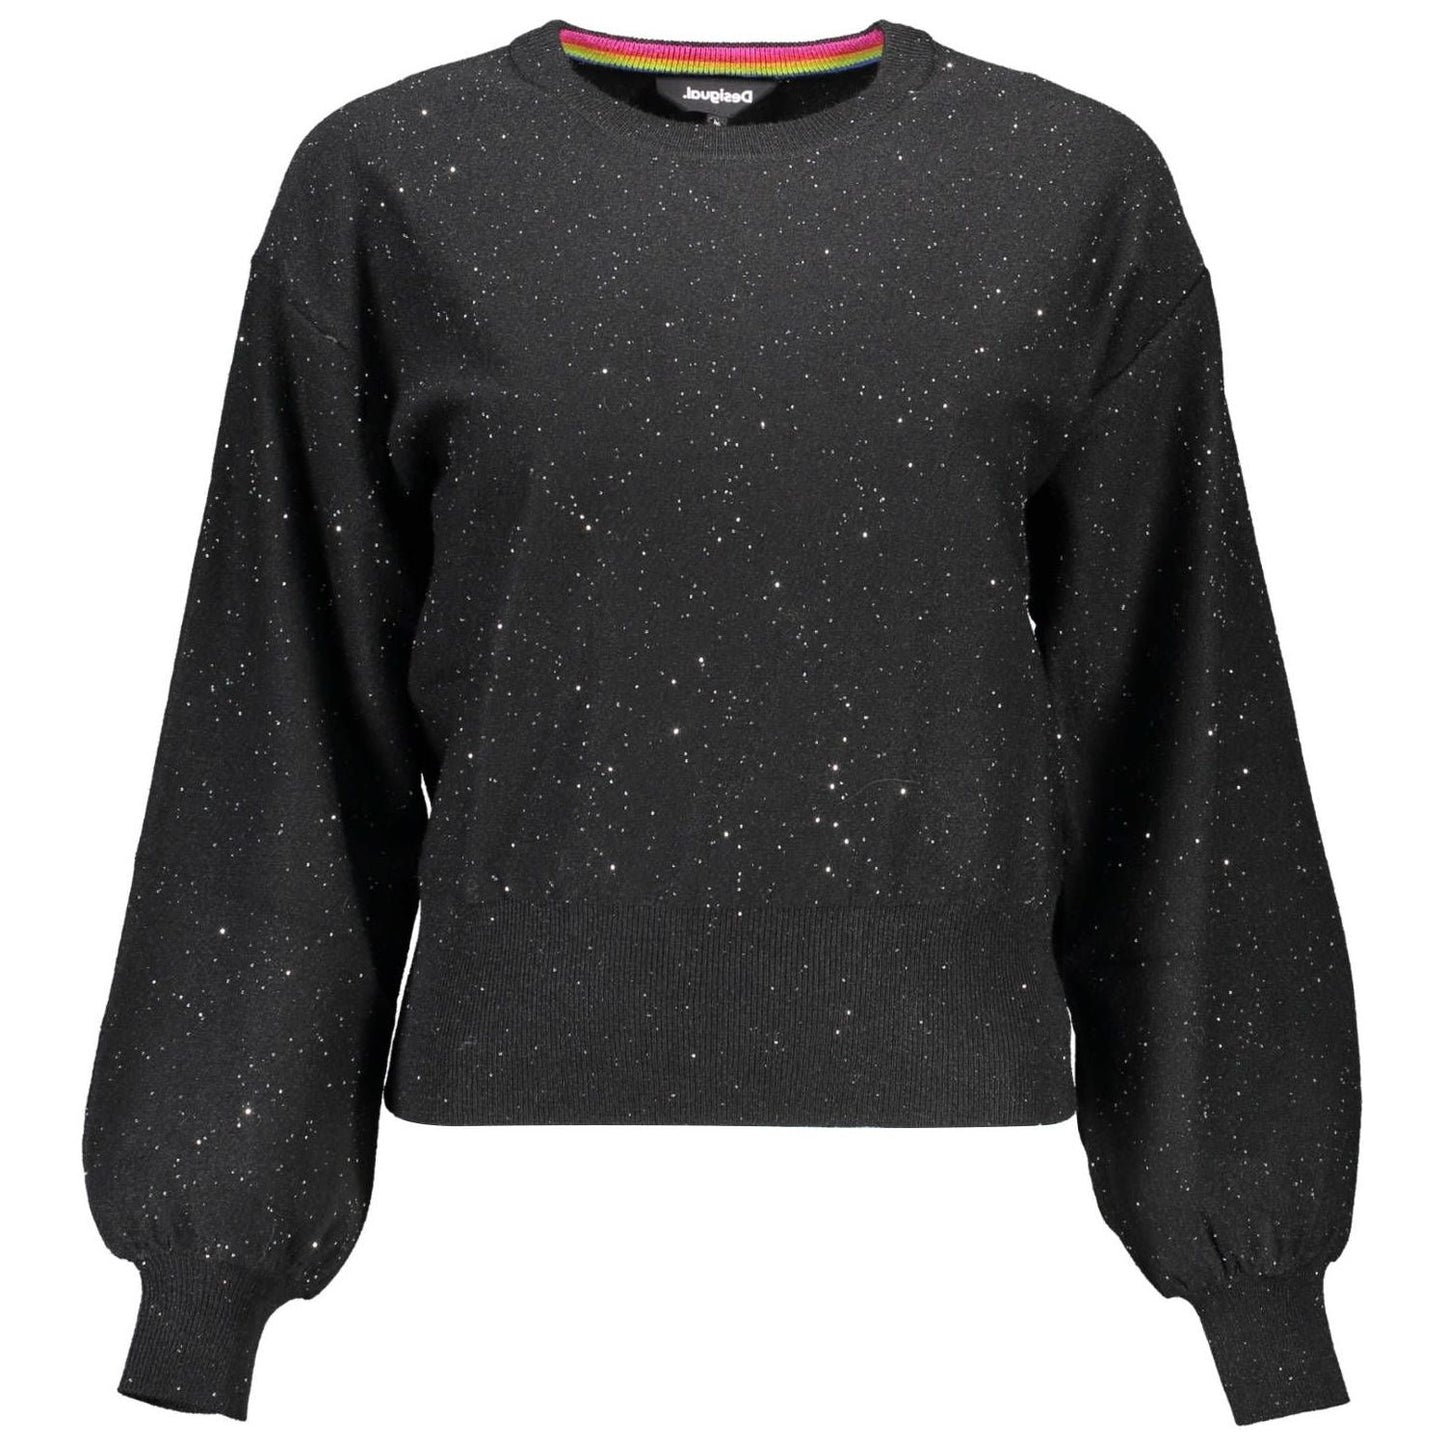 Desigual Elegant Long-Sleeved Sweater with Contrasting Accents elegant-long-sleeved-sweater-with-contrasting-accents